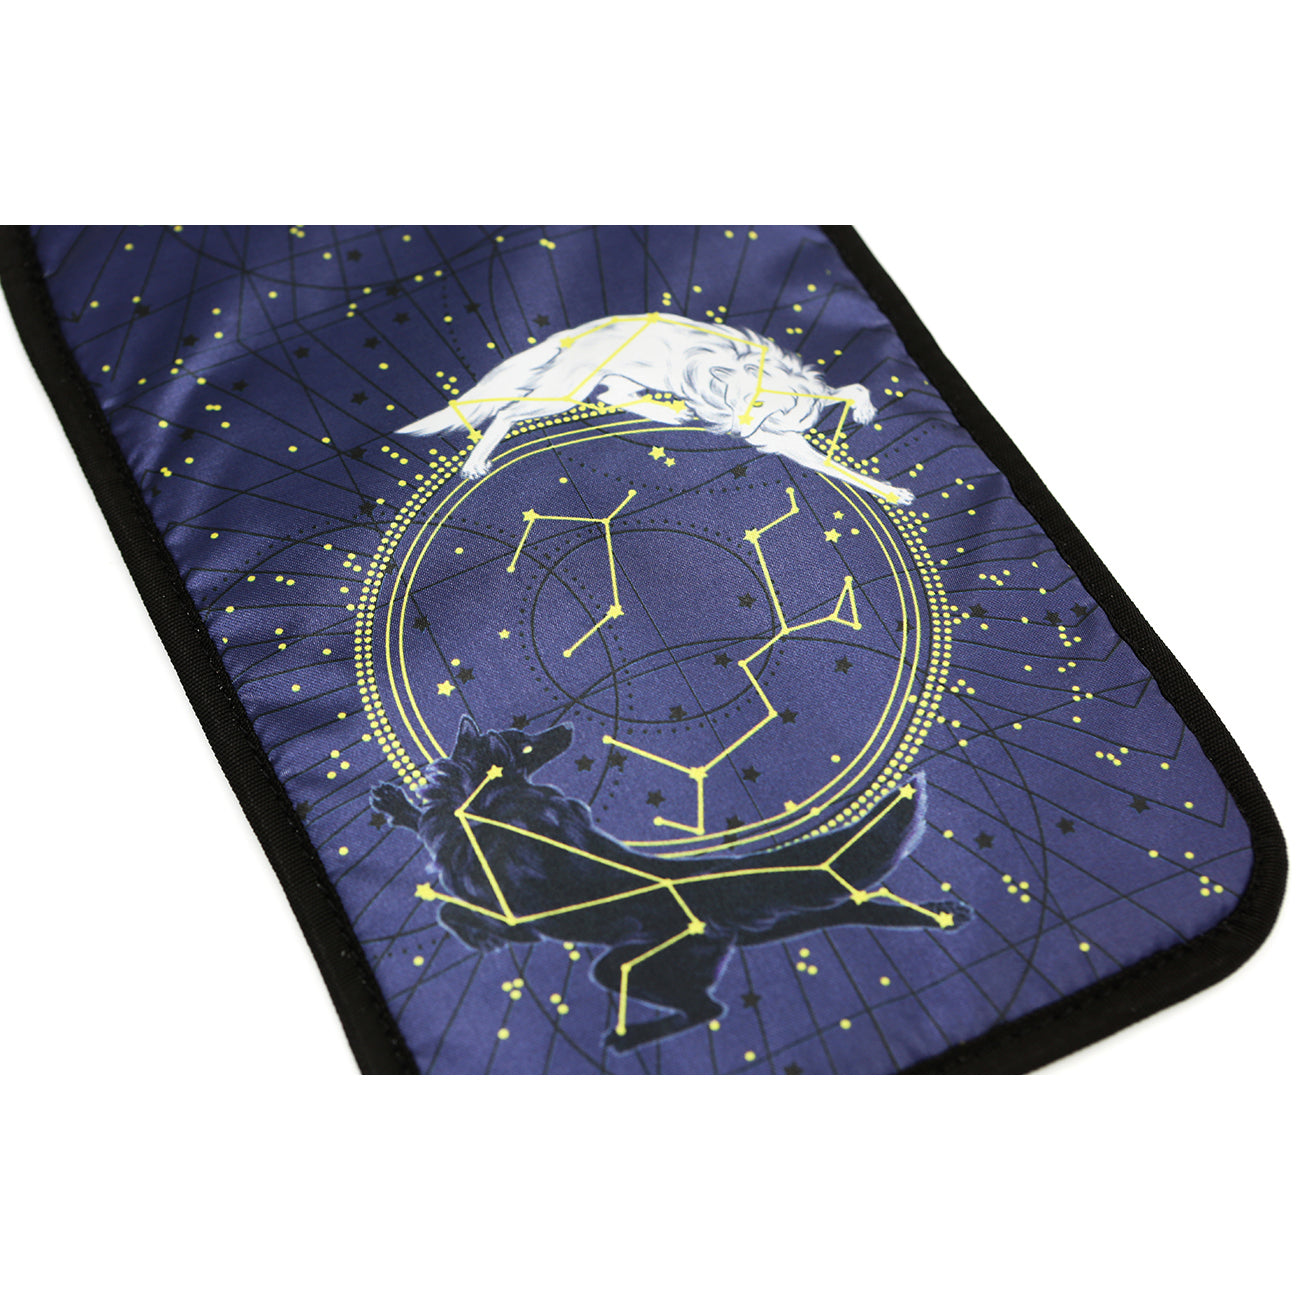 Ita bag celestial wolves insert. The insert has purple lining with black and gold constellation details. A white wolf and a black wolf circle one another over a central round constellation.